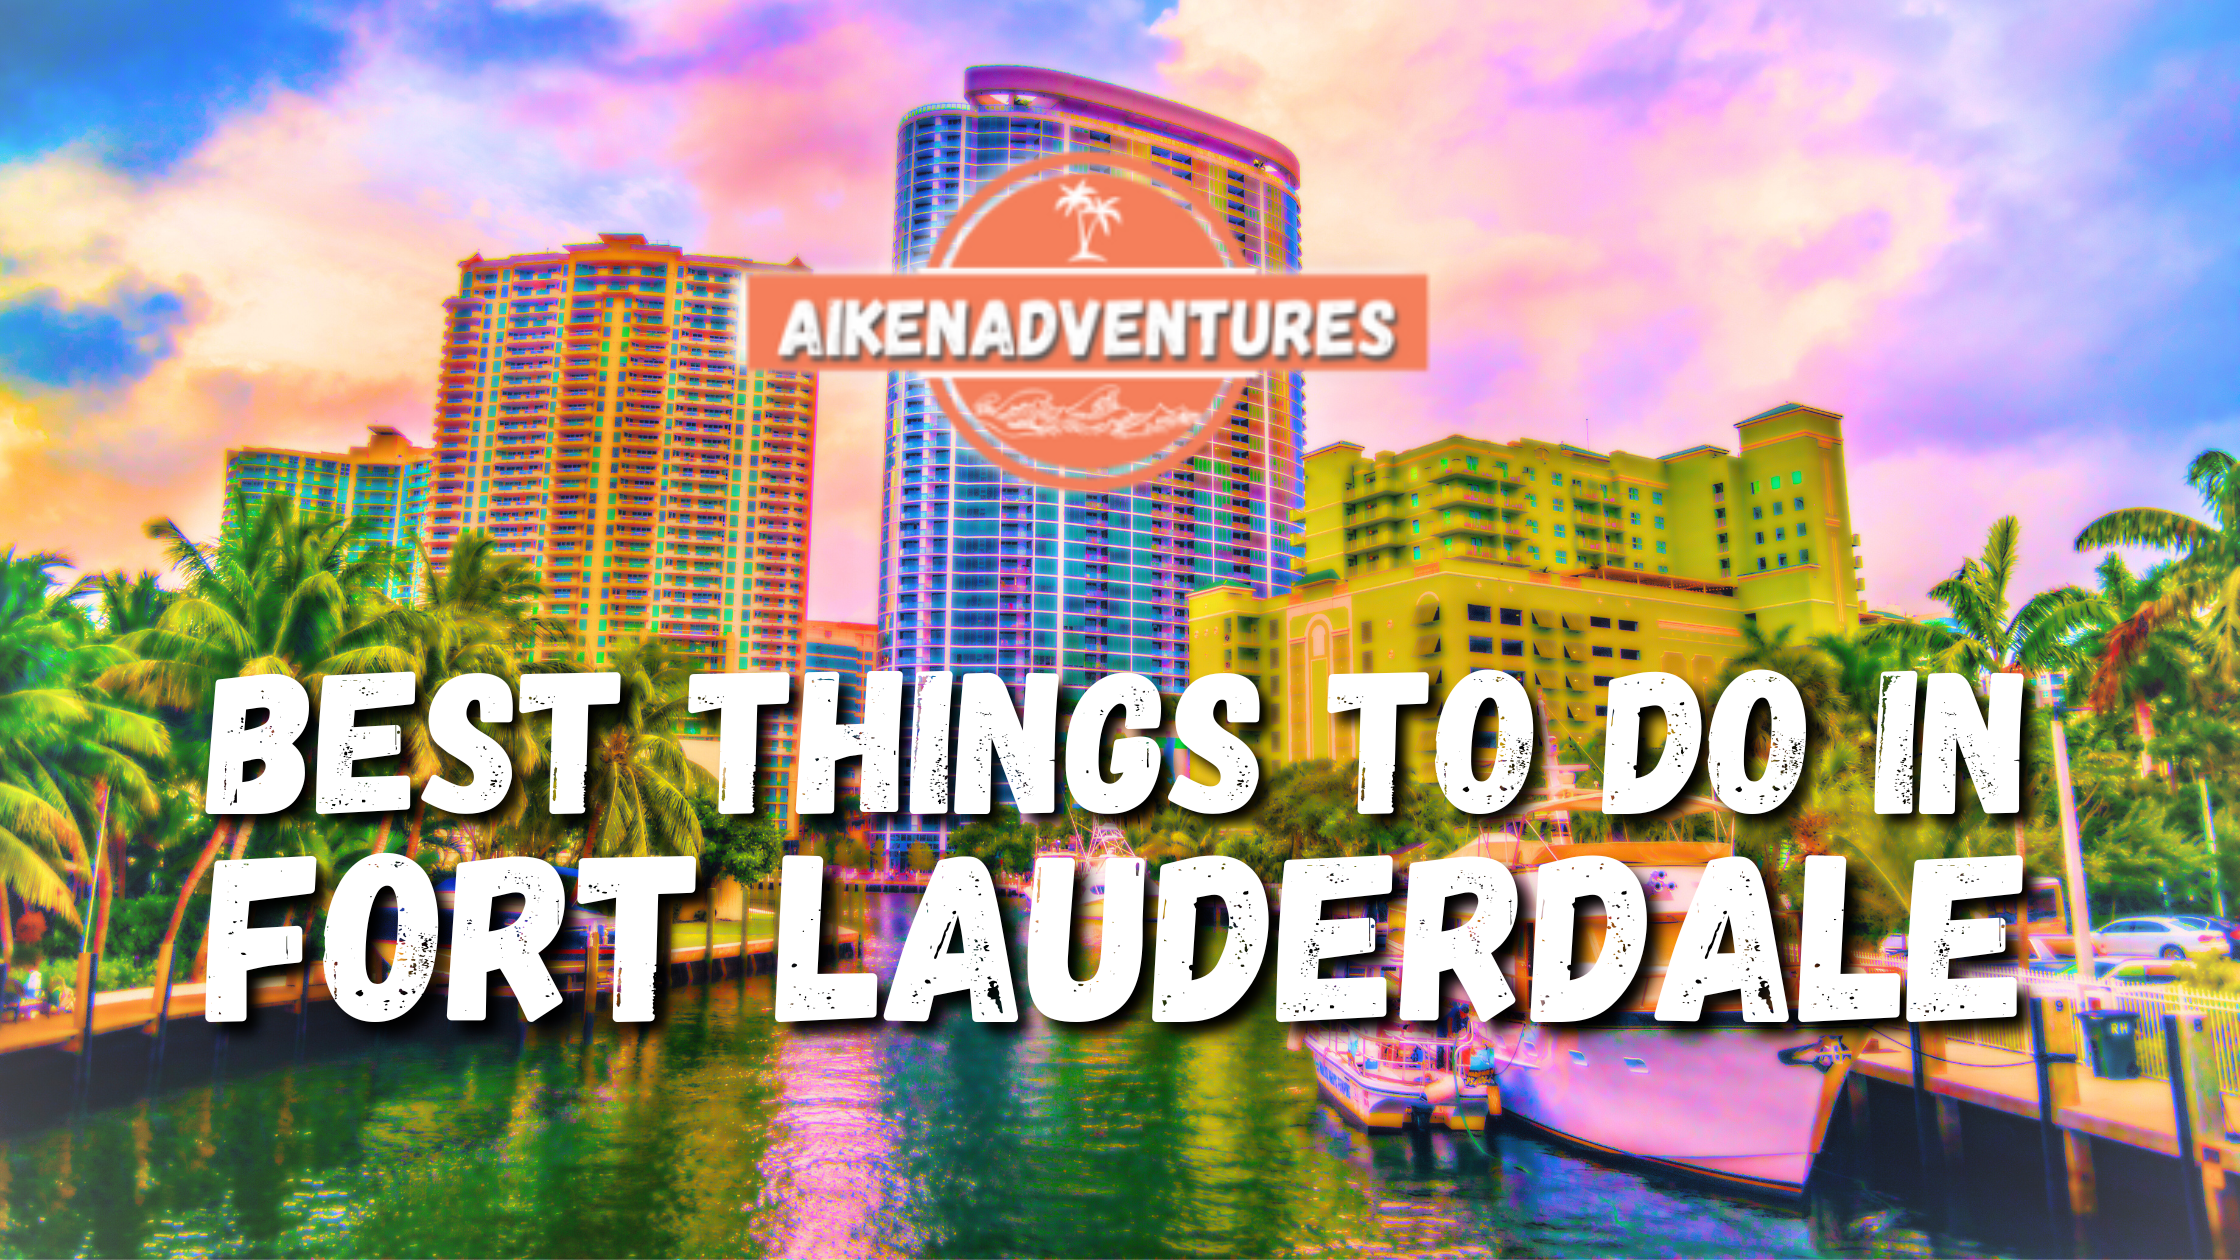 Best Things to do in Fort Lauderdale, Florida